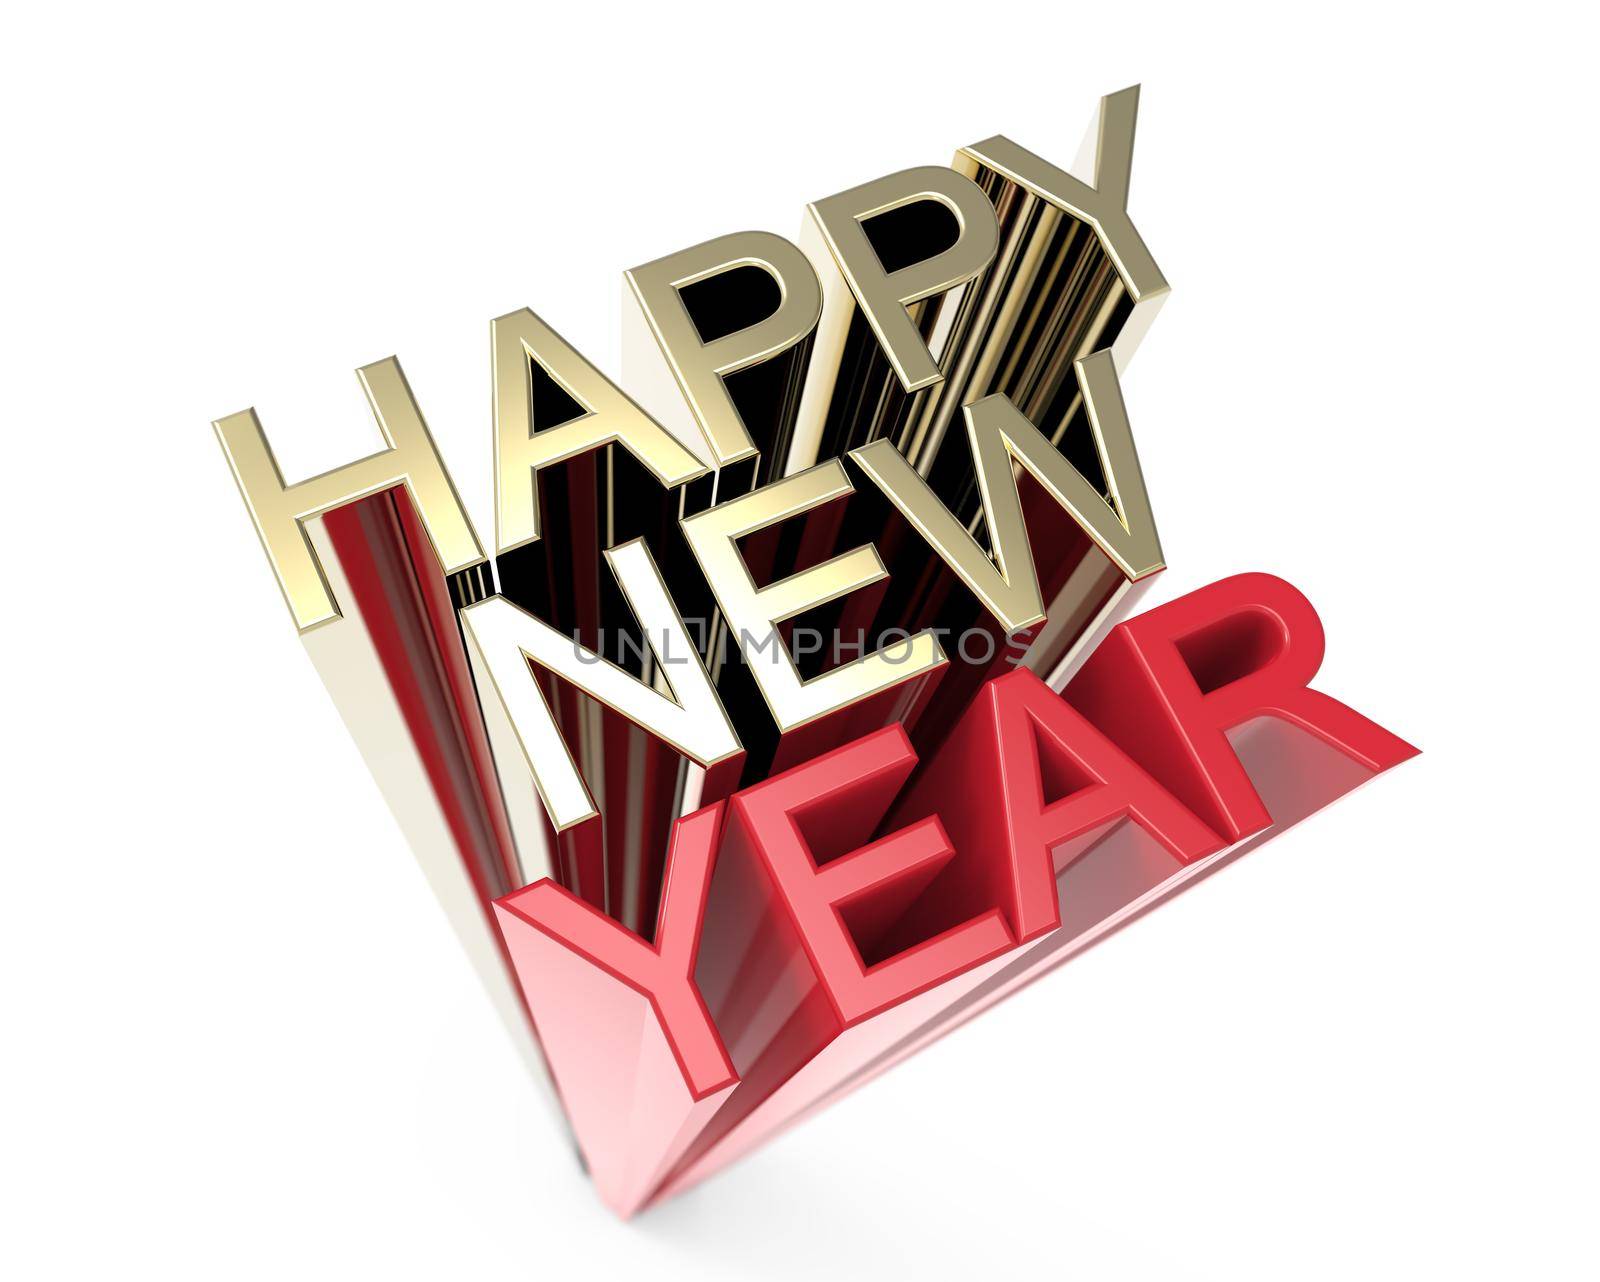 Happy new year on a white background: 3d illustration